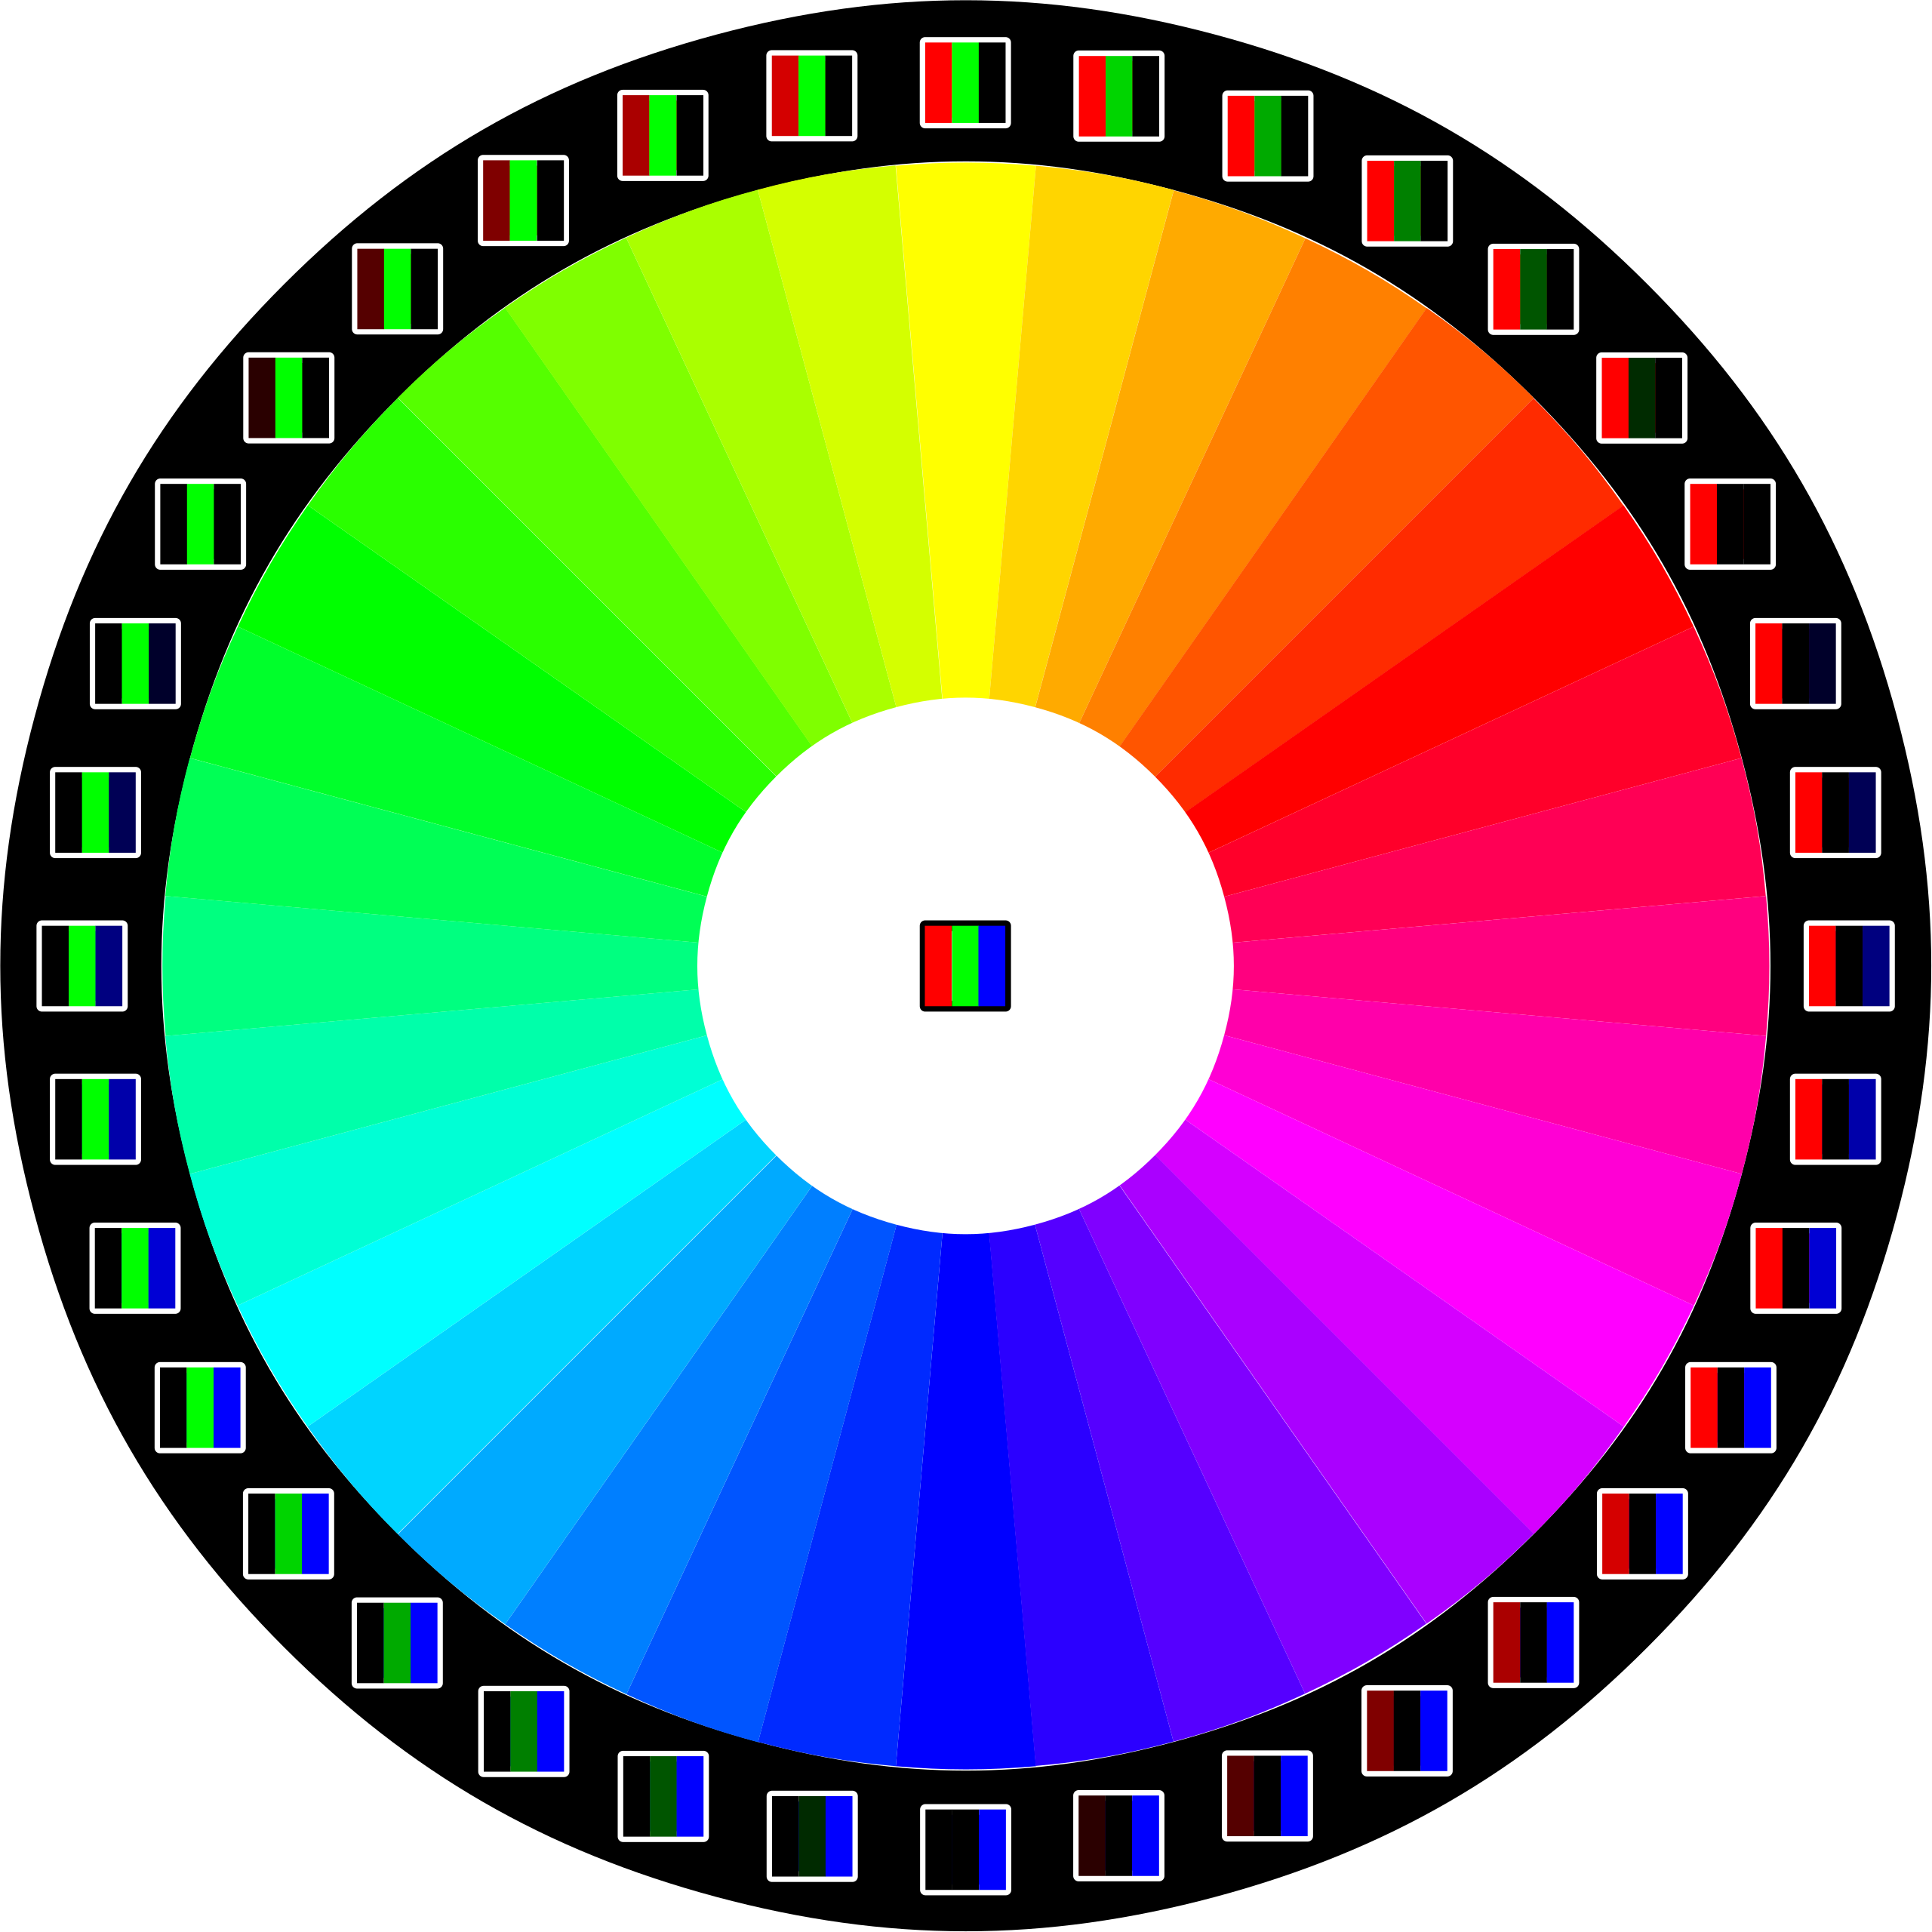 Red, Green and Blue (RGB) Colour Wheel